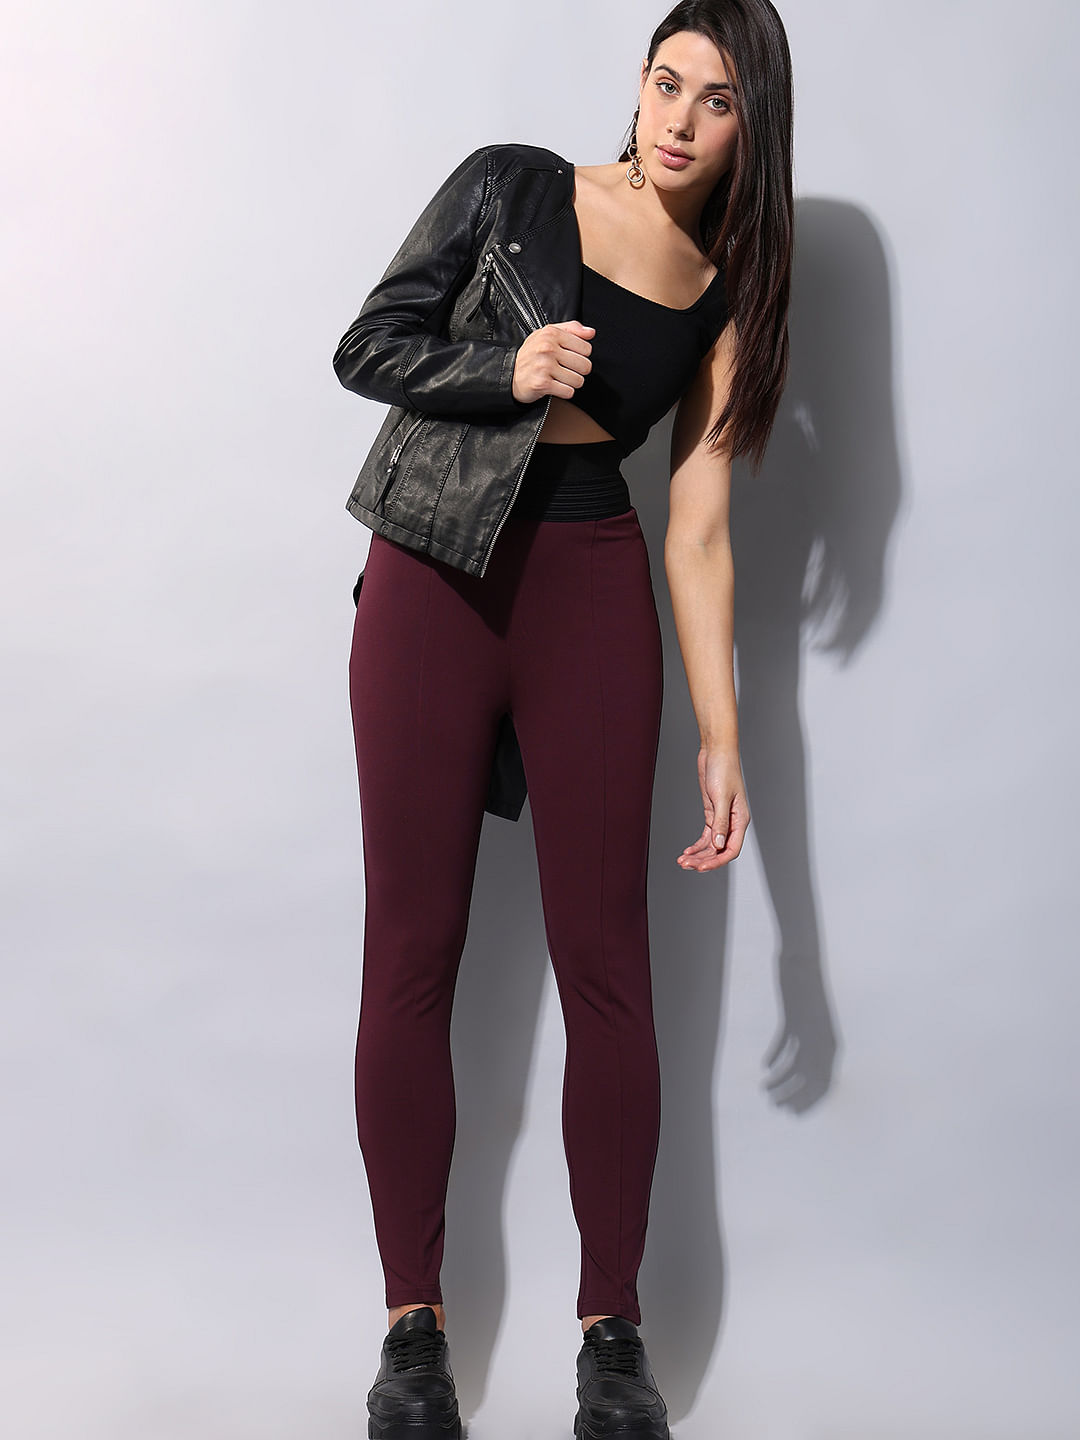 12 outfit ideas to wear burgundy jeans  http://www.youtube.com/watch?v=ulEpiG62D8I | Burgundy jeans, Burgundy pants  outfit, Outfits with leggings